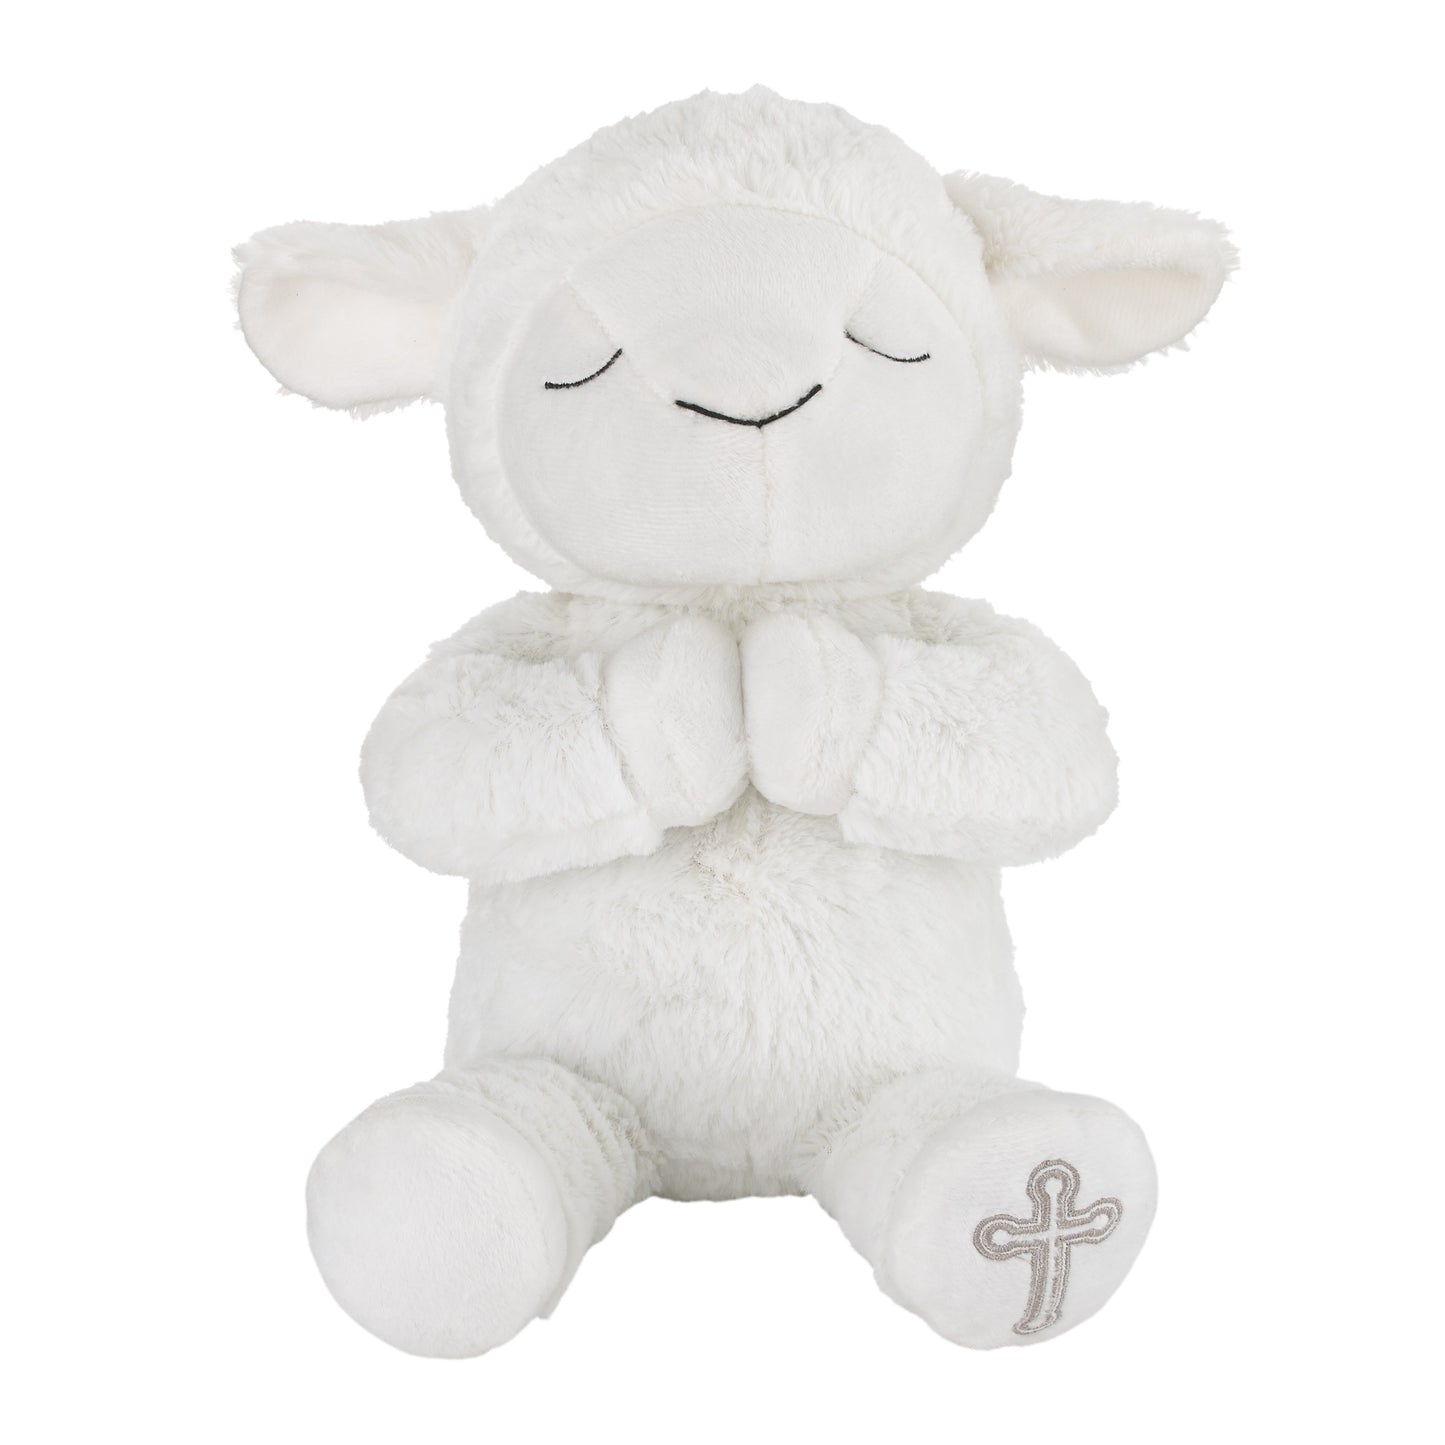 Little Love by NoJo White Plush Lamb with Praying Hands and Embroidered Cross for Baptism or Christening Gift